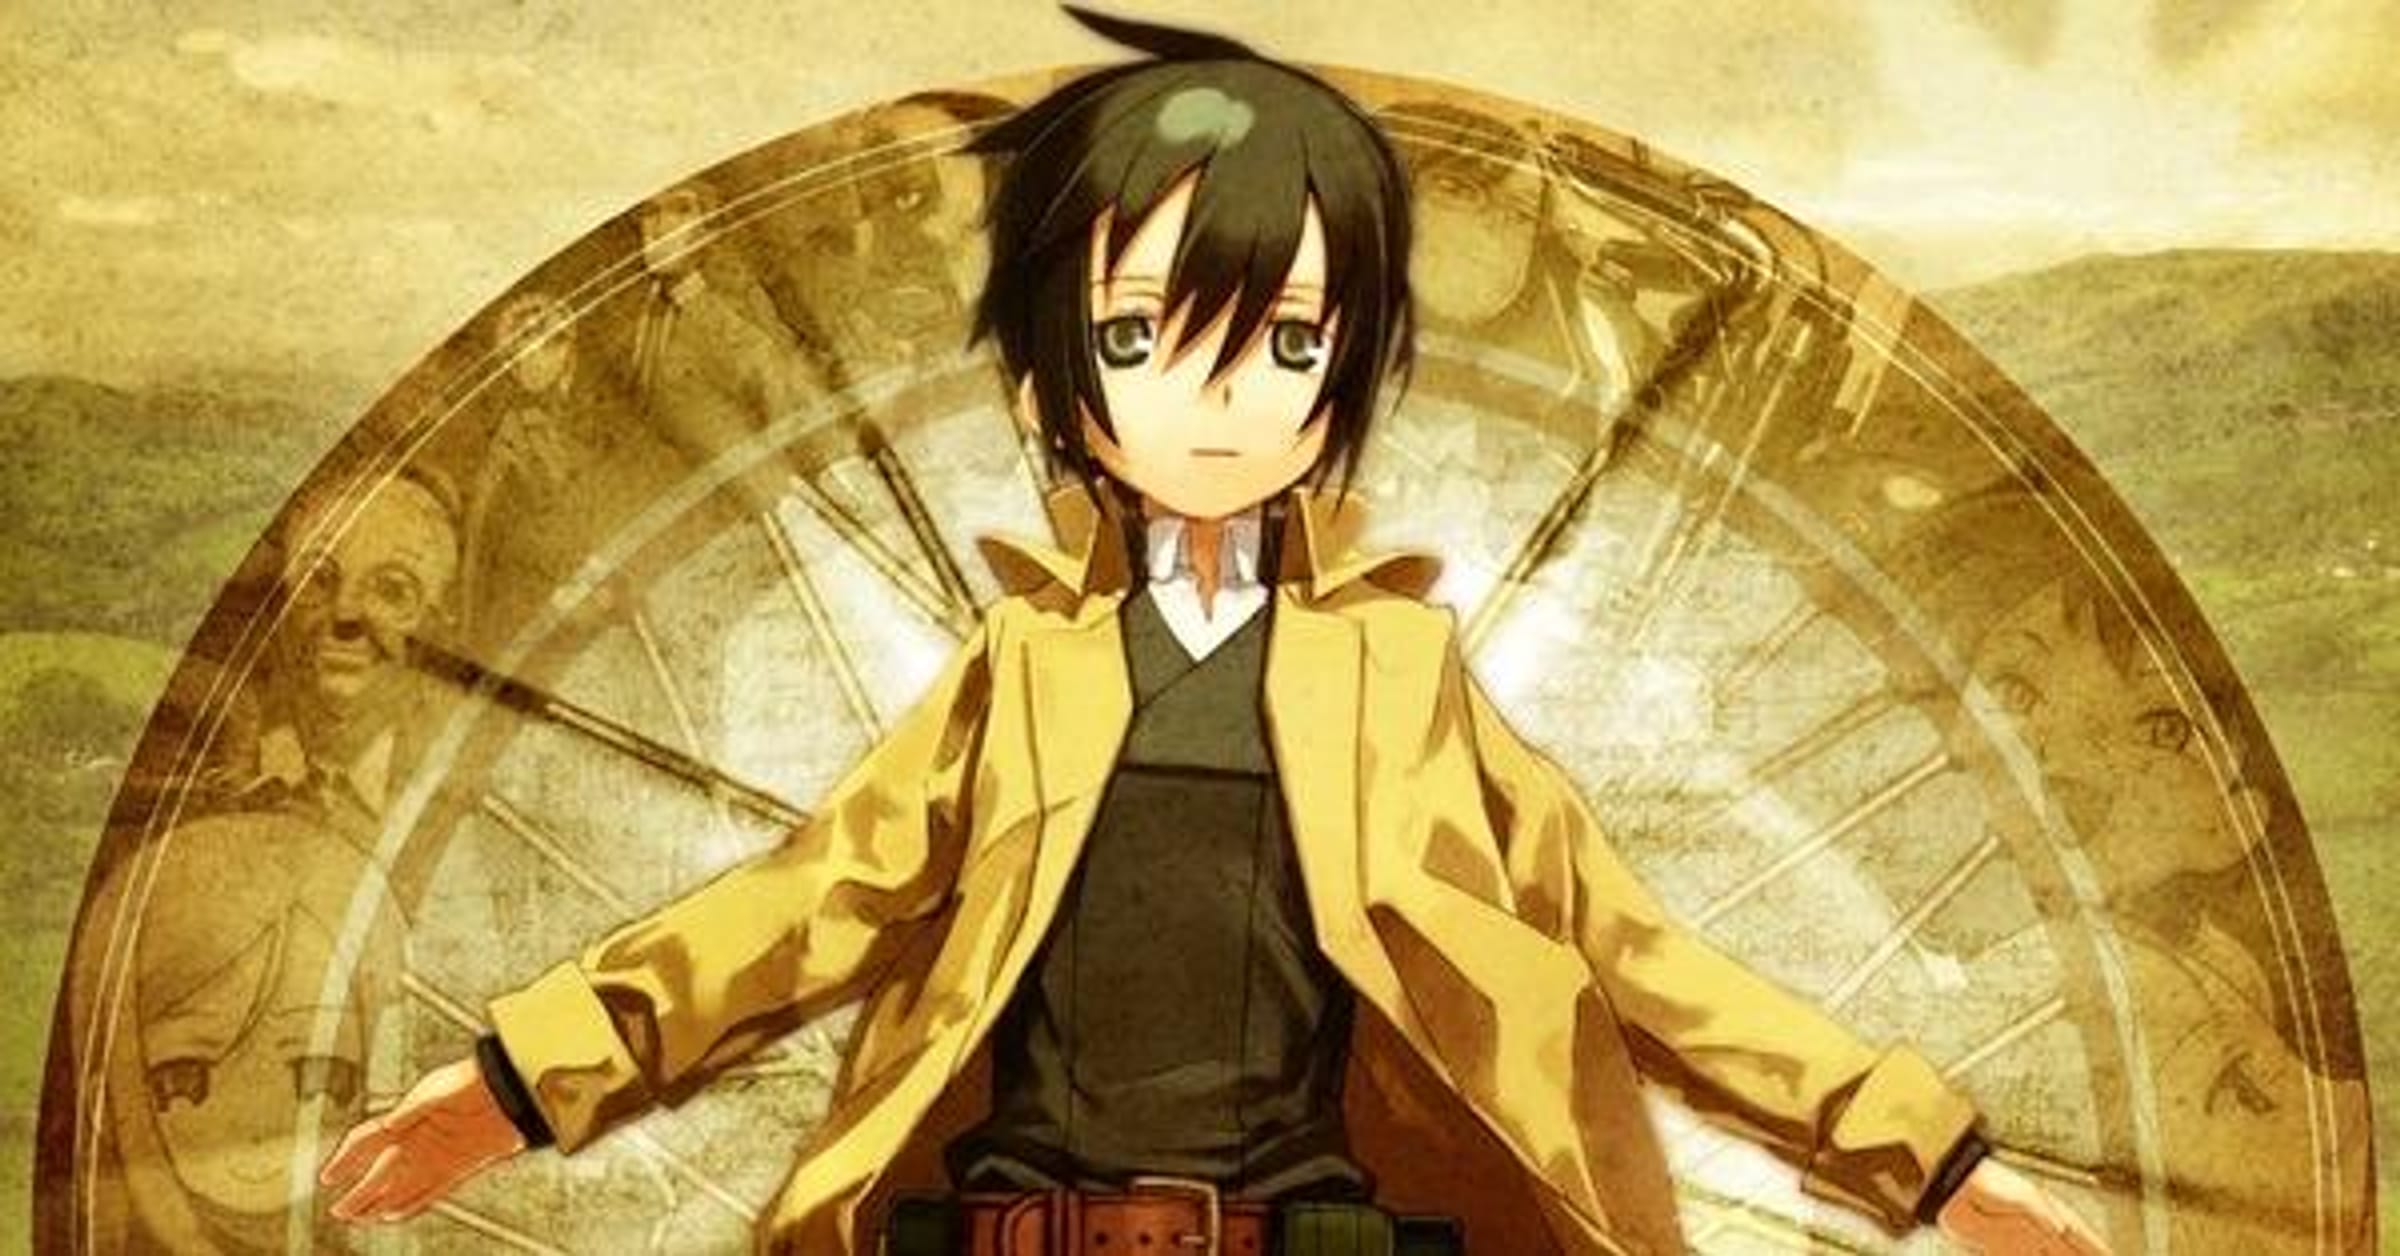 What are some good (clean) anime for Christians? - Quora